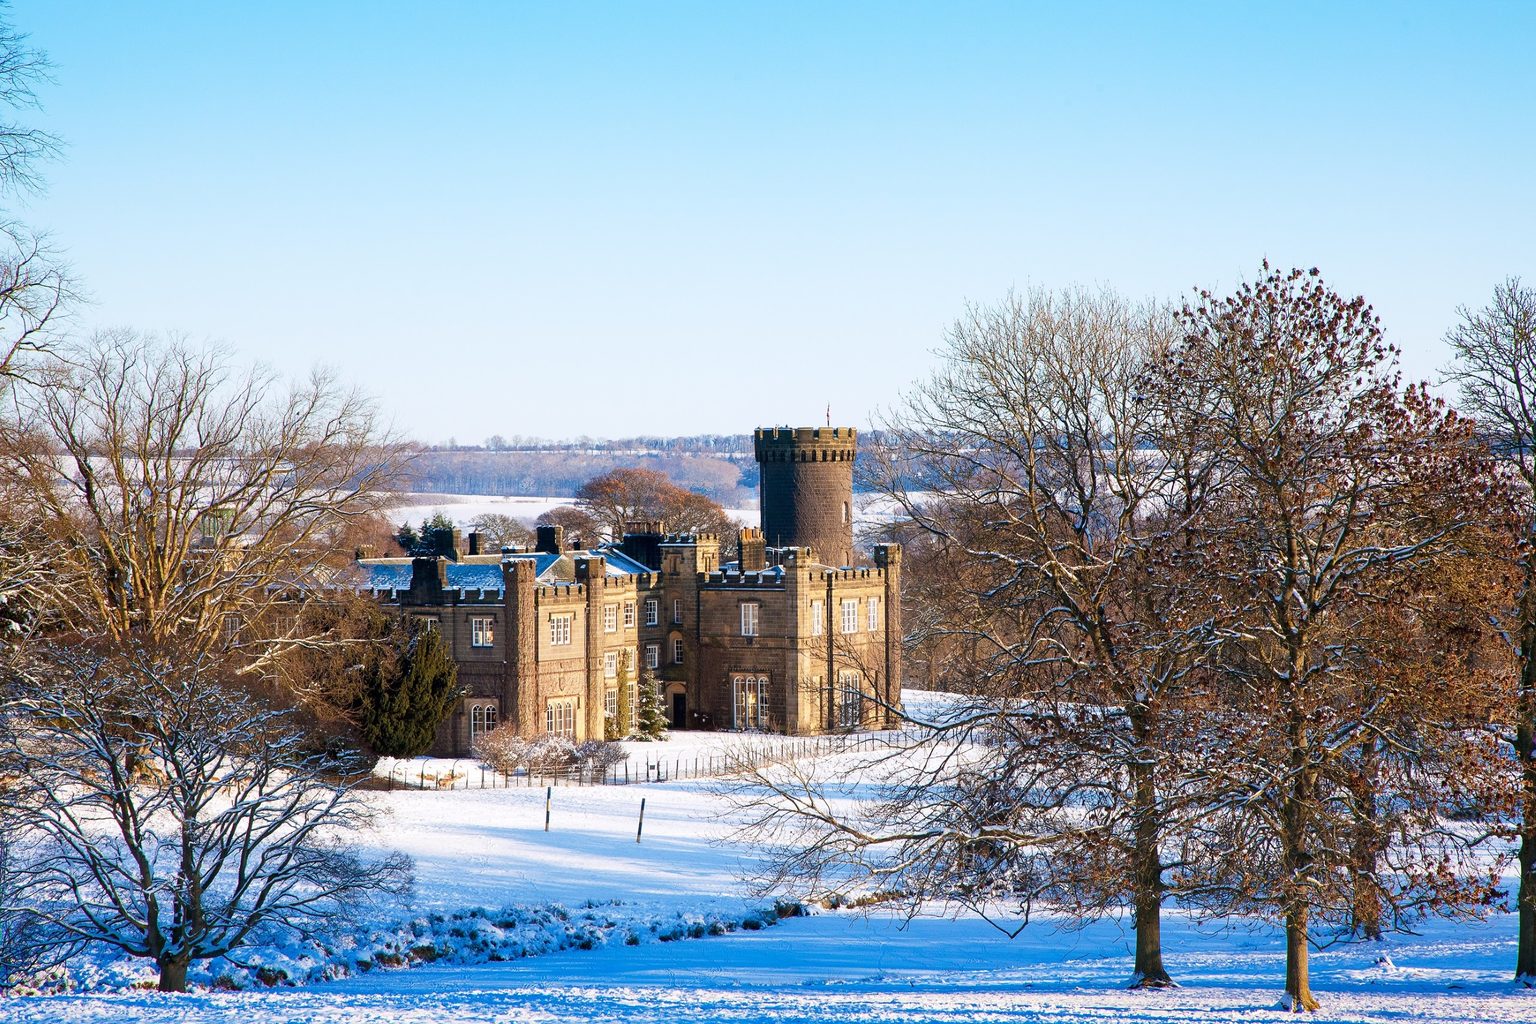 The castle-like exterior of Swinton Park Hotel surround by snow during the winter on the Swinton Estate in North Yorkshire